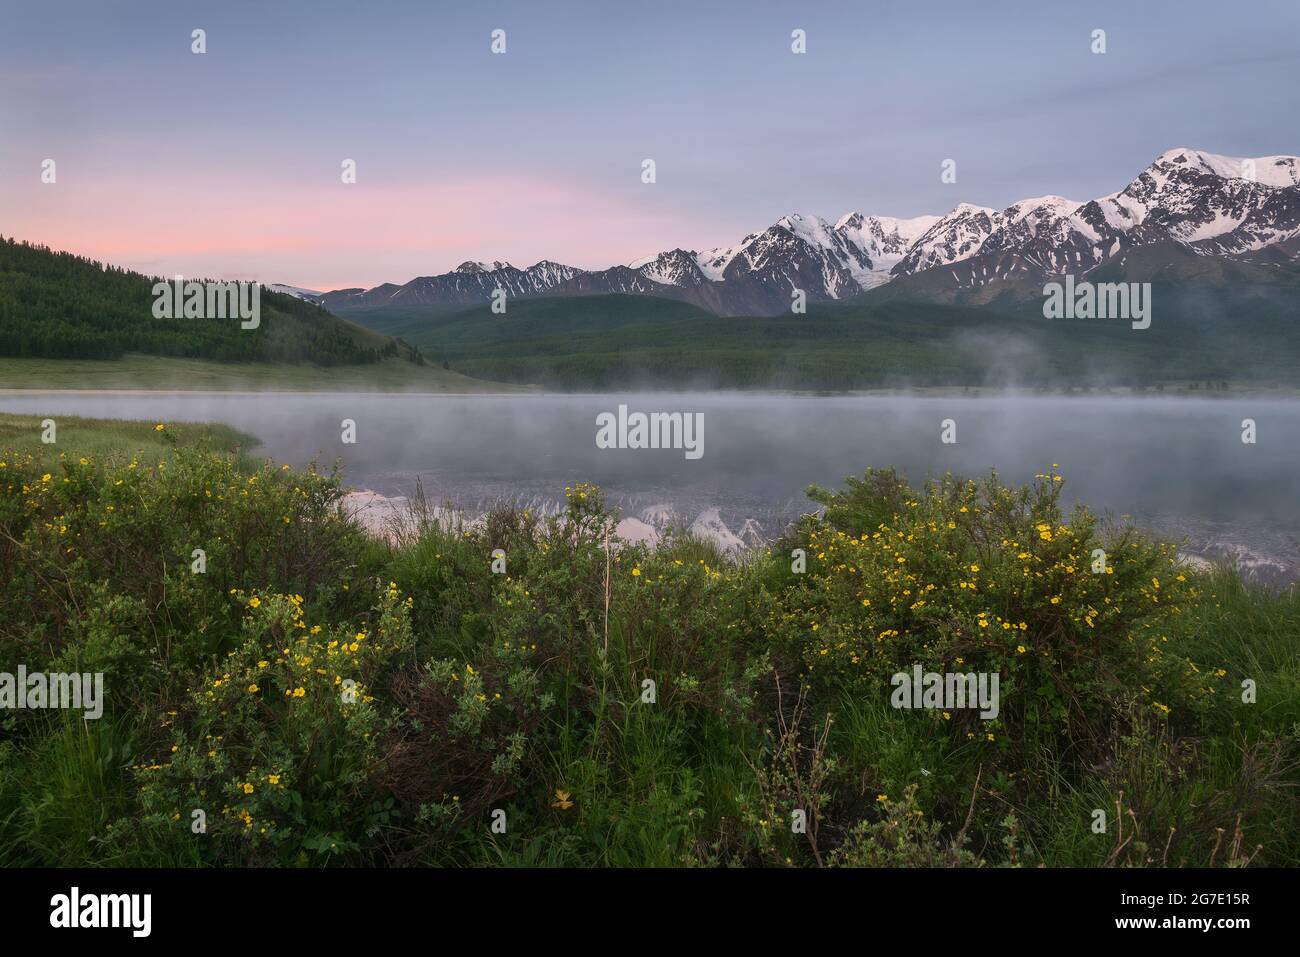 Amazing delicate pink dawn over mountains covered with snow and forest, fog over the lake, reflections and bushes of Kuril tea (Dasiphora) on the shor Stock Photo